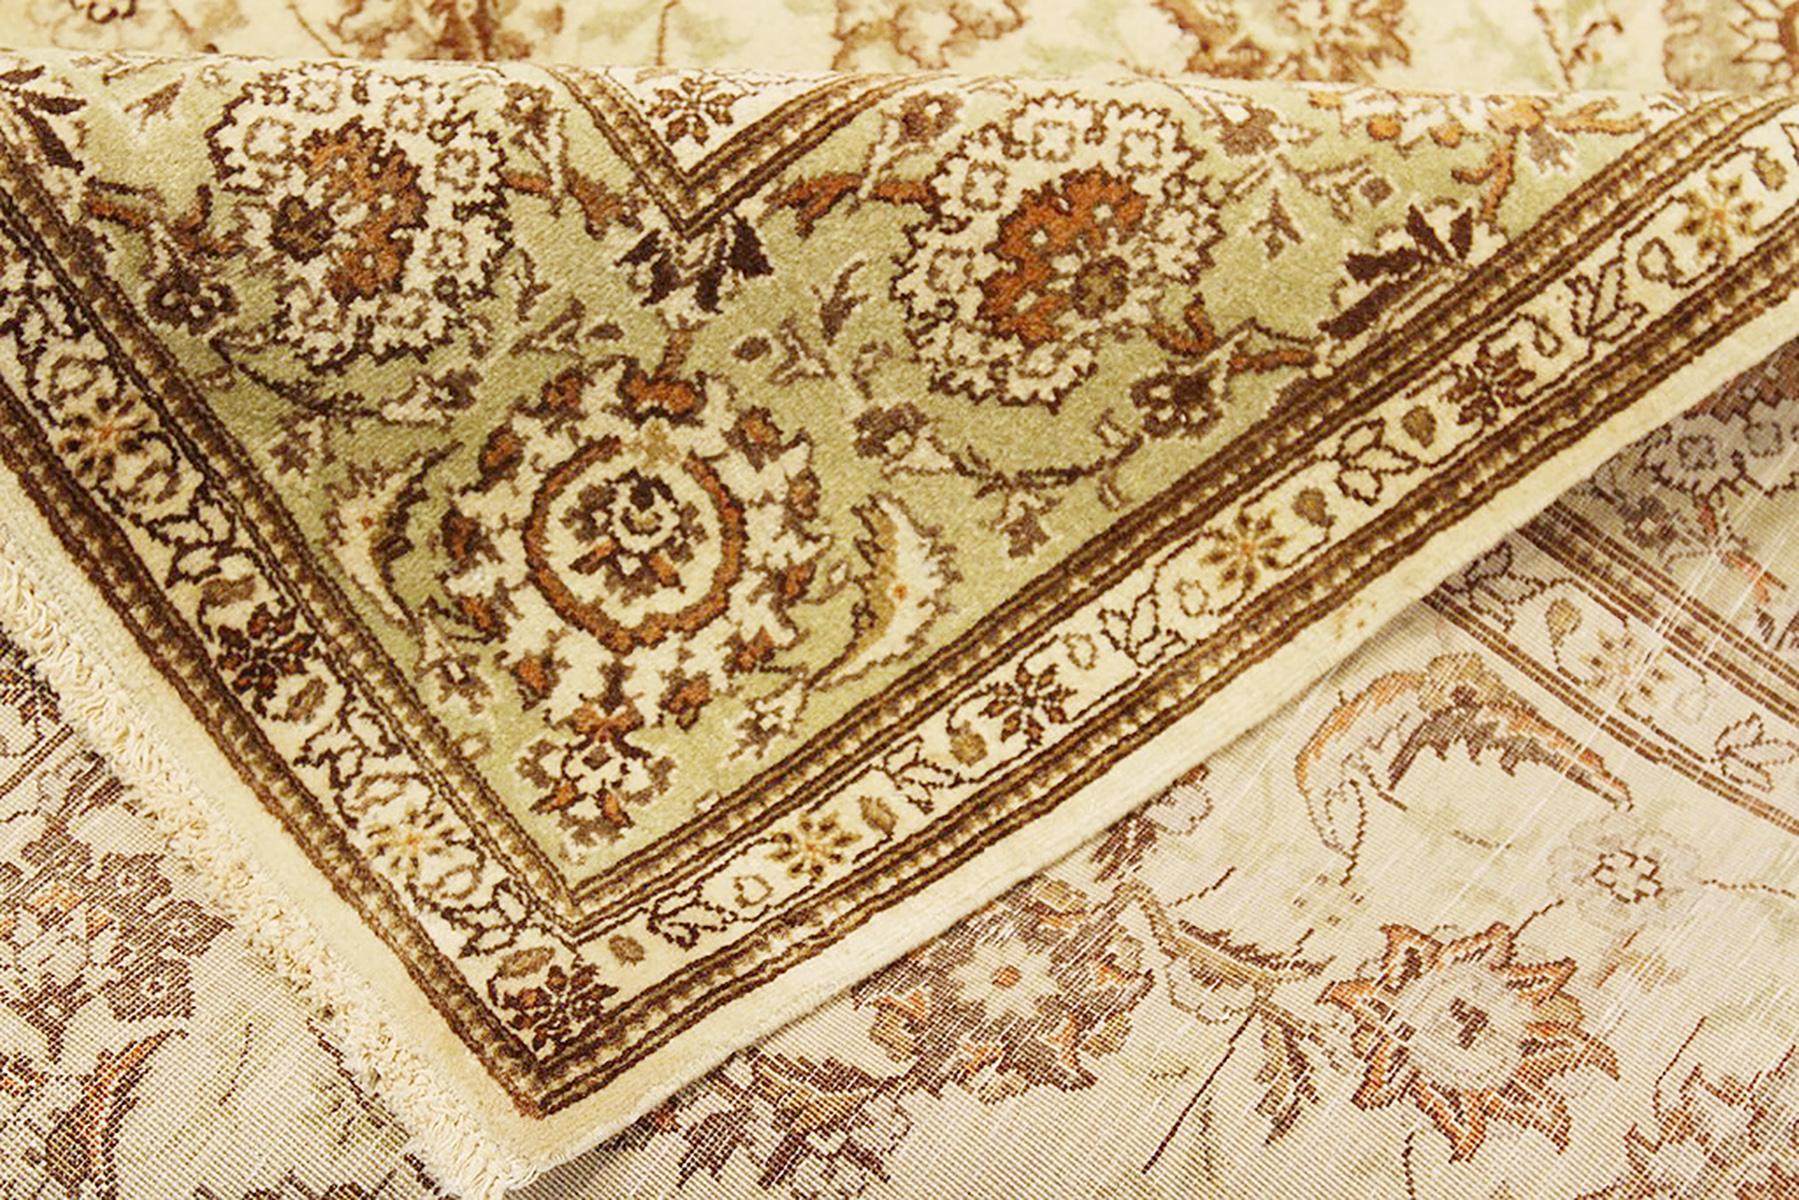 Hand-Woven Antique Persian Kashan Rug with Brown and White Floral Details Over Ivory Field For Sale